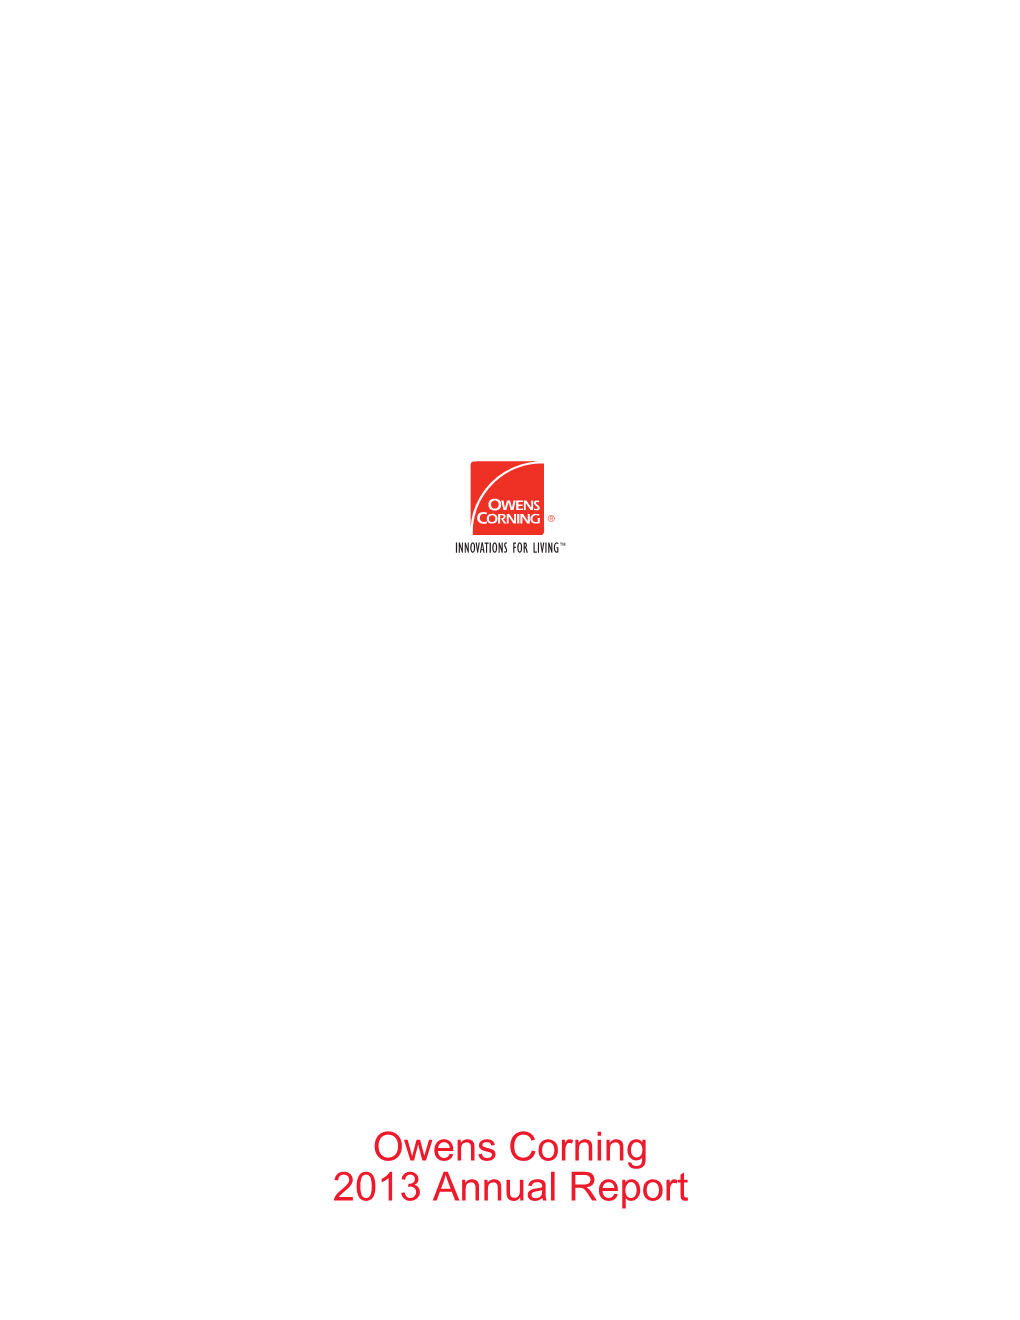 Owens Corning 2013 Annual Report